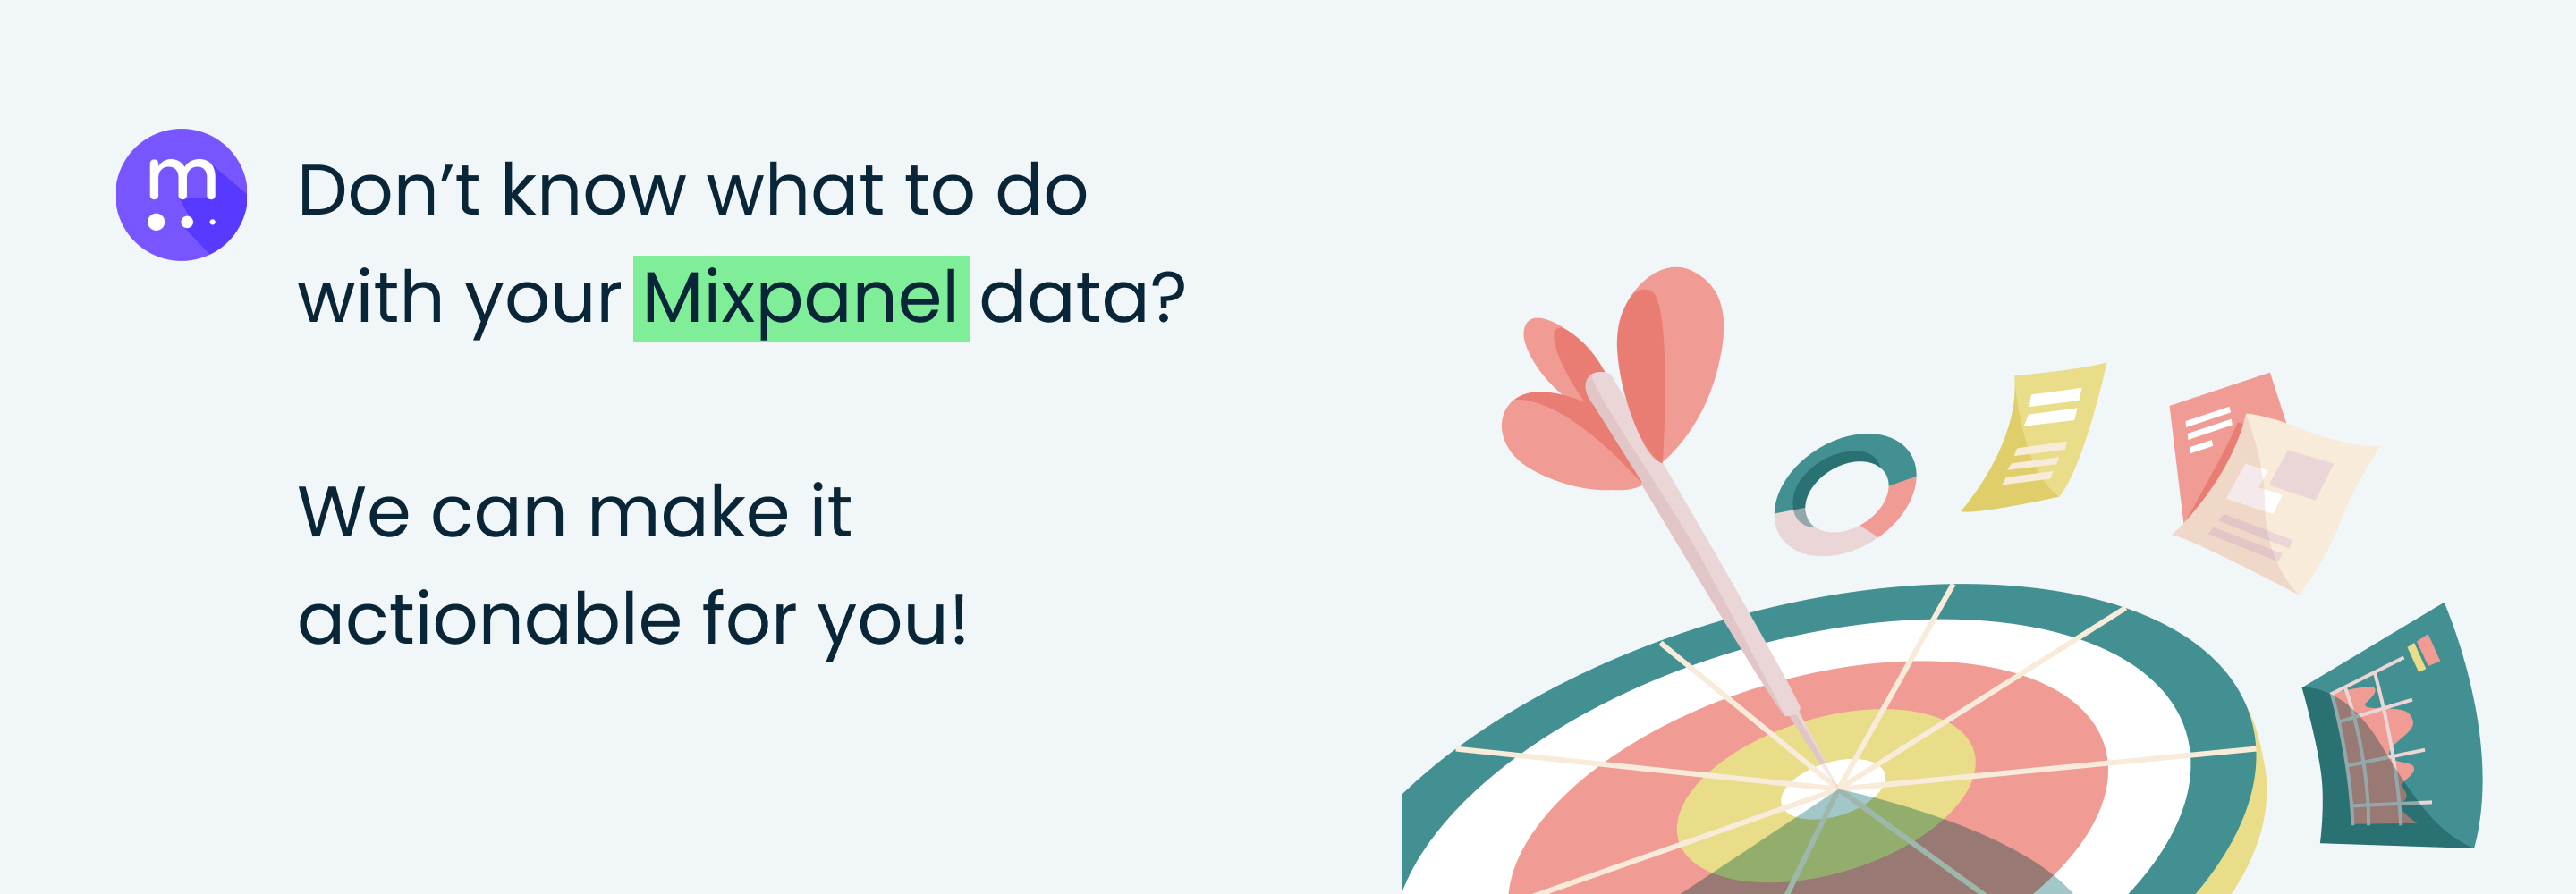 Get our Mixpanel actionable data package